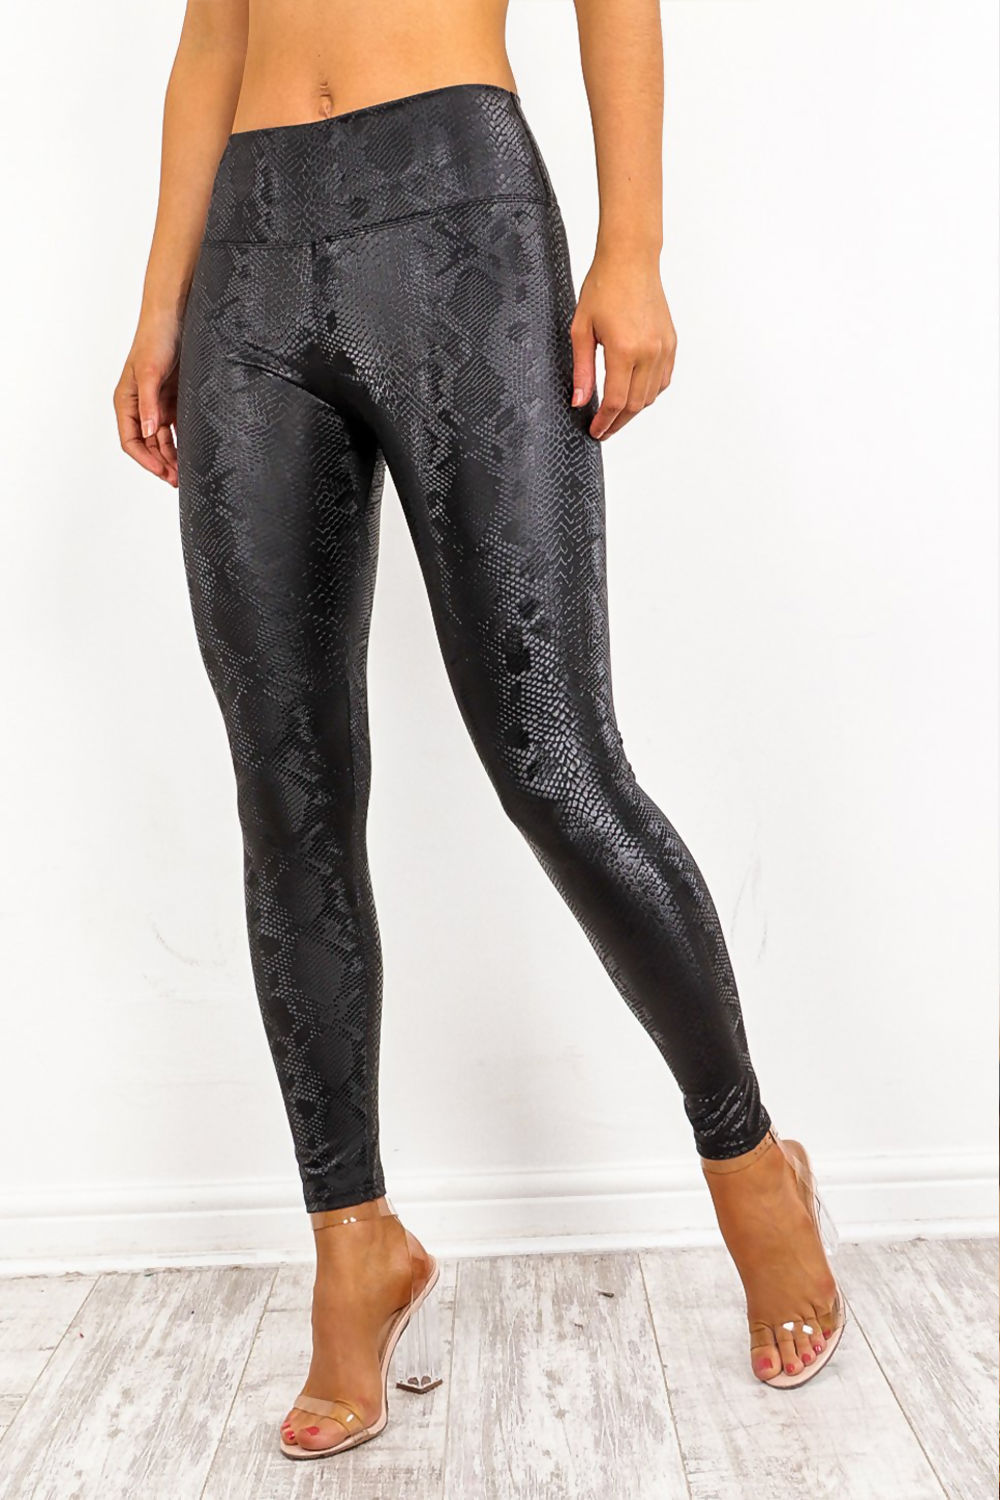 Model wears snake skin leggings with high waisted panelling. Model stands to the side. The snake skin pattern is visisble. 